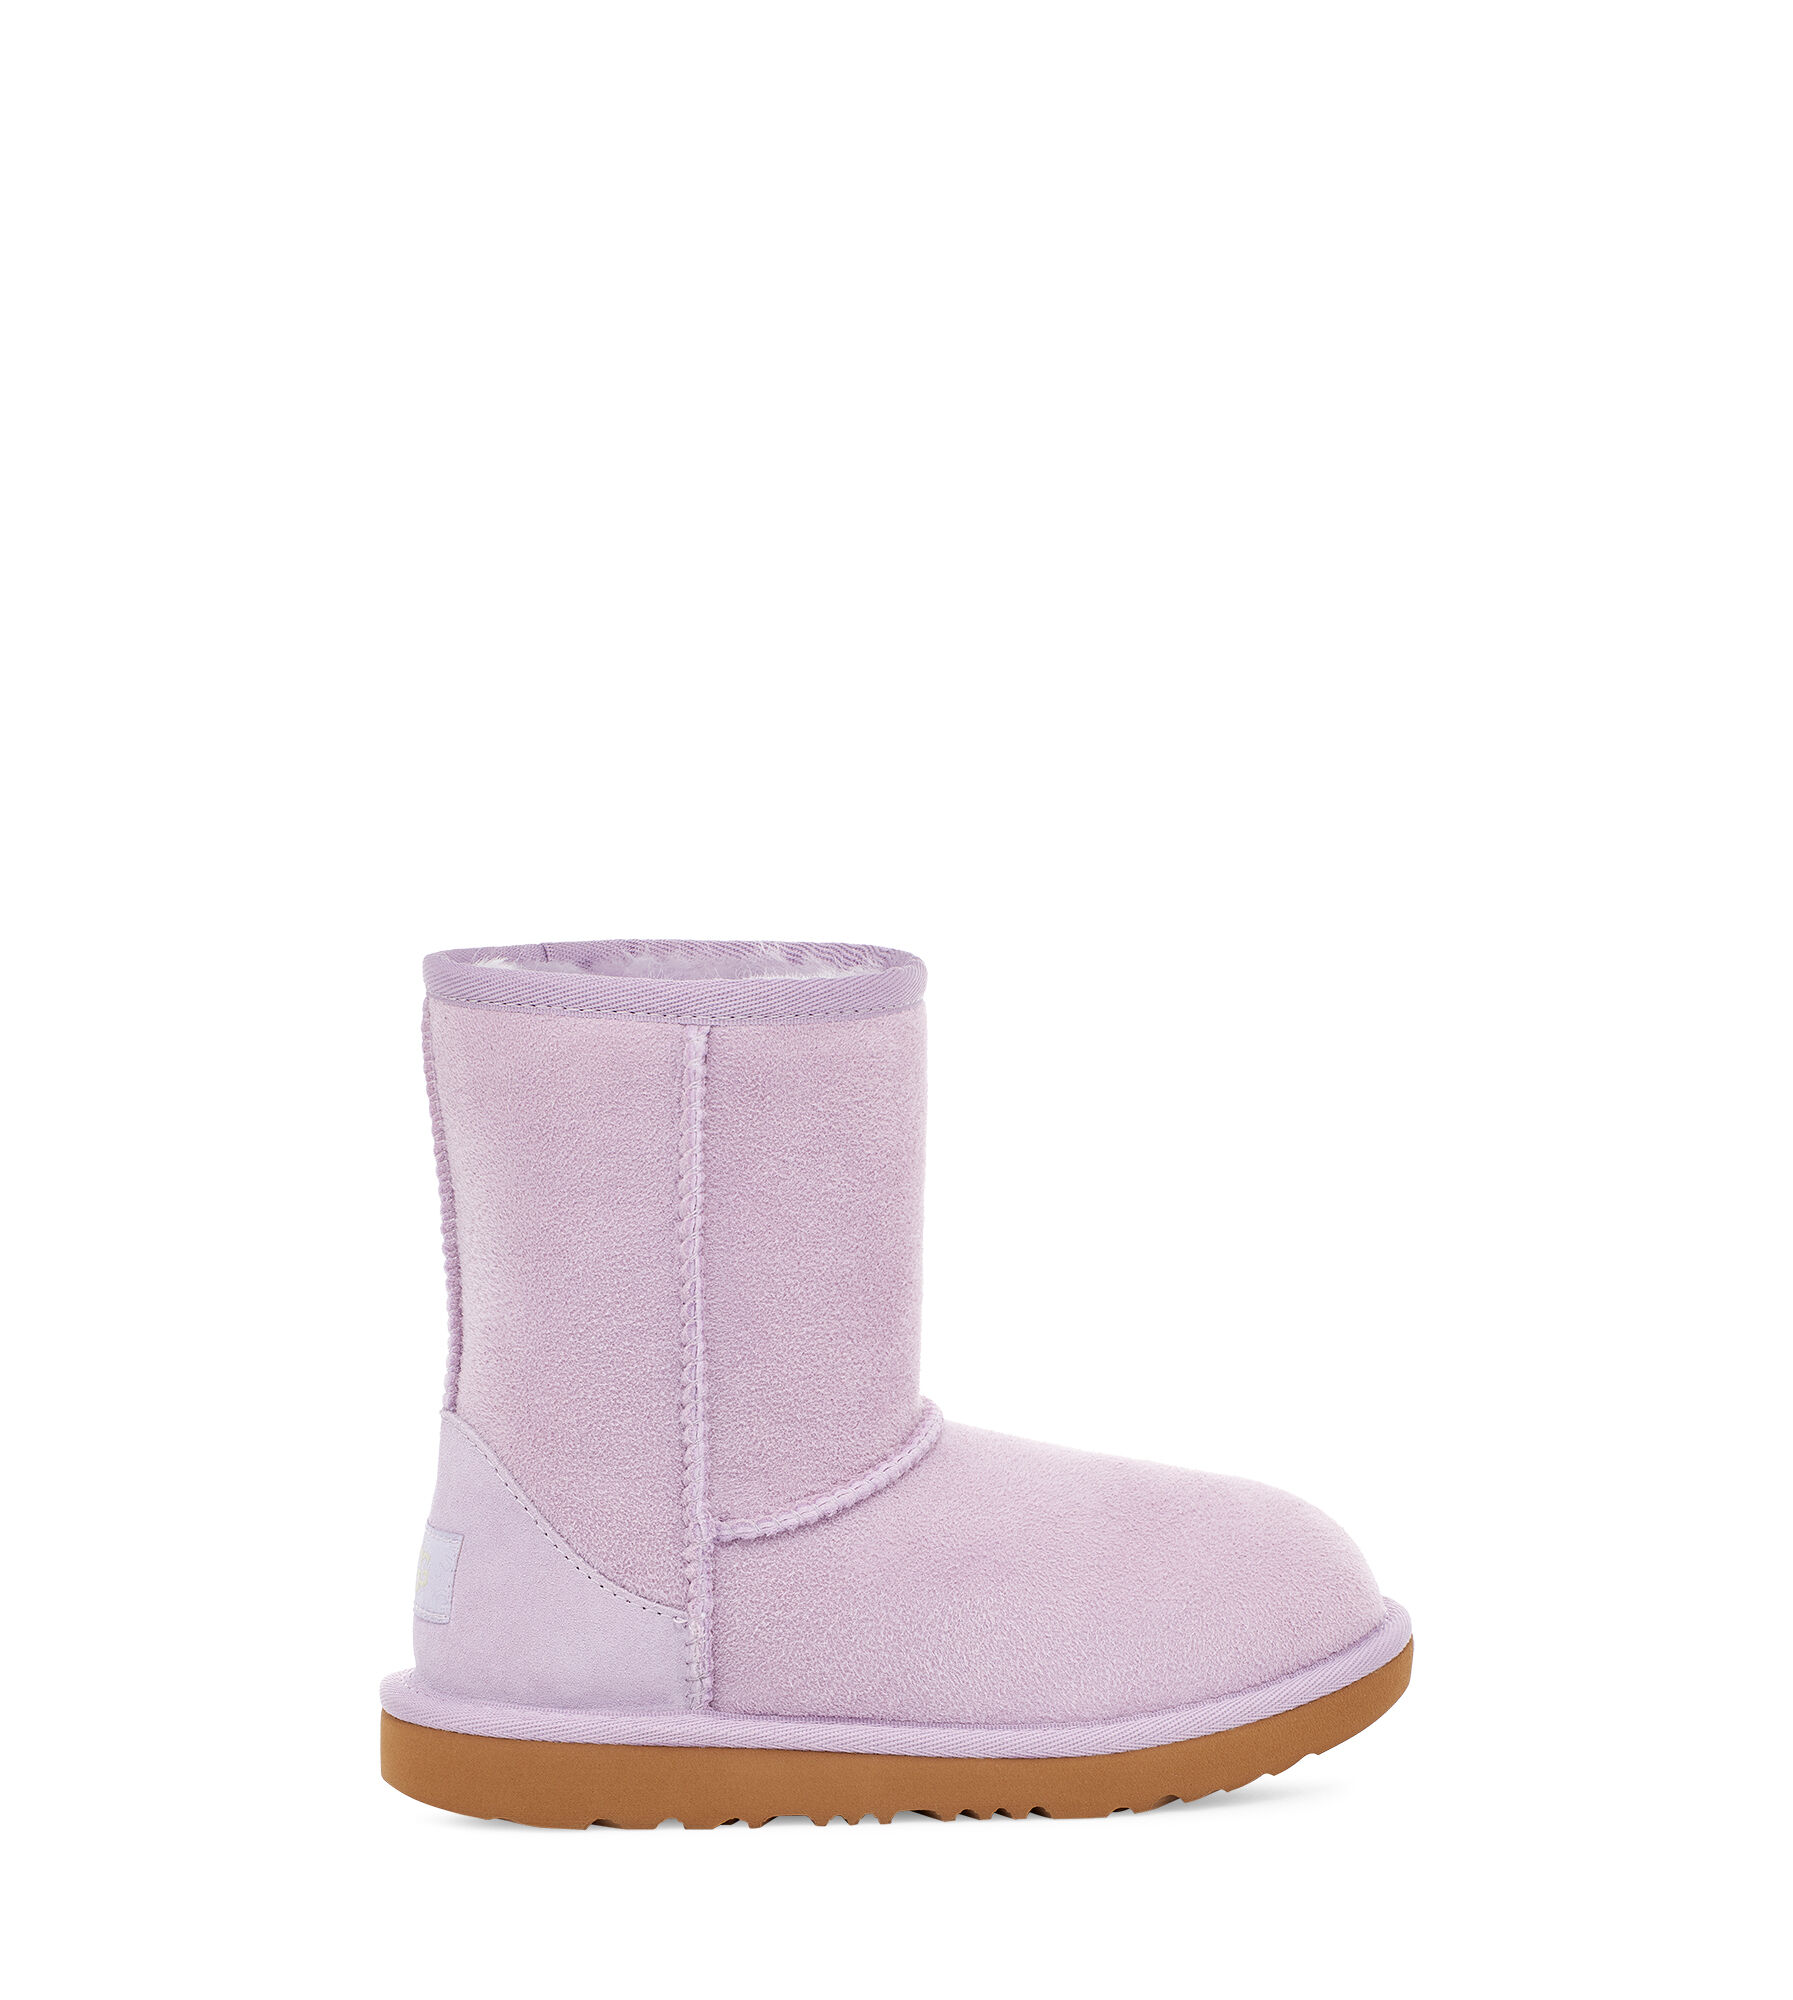 Girls' Boots \u0026 Shoes | UGG® Official